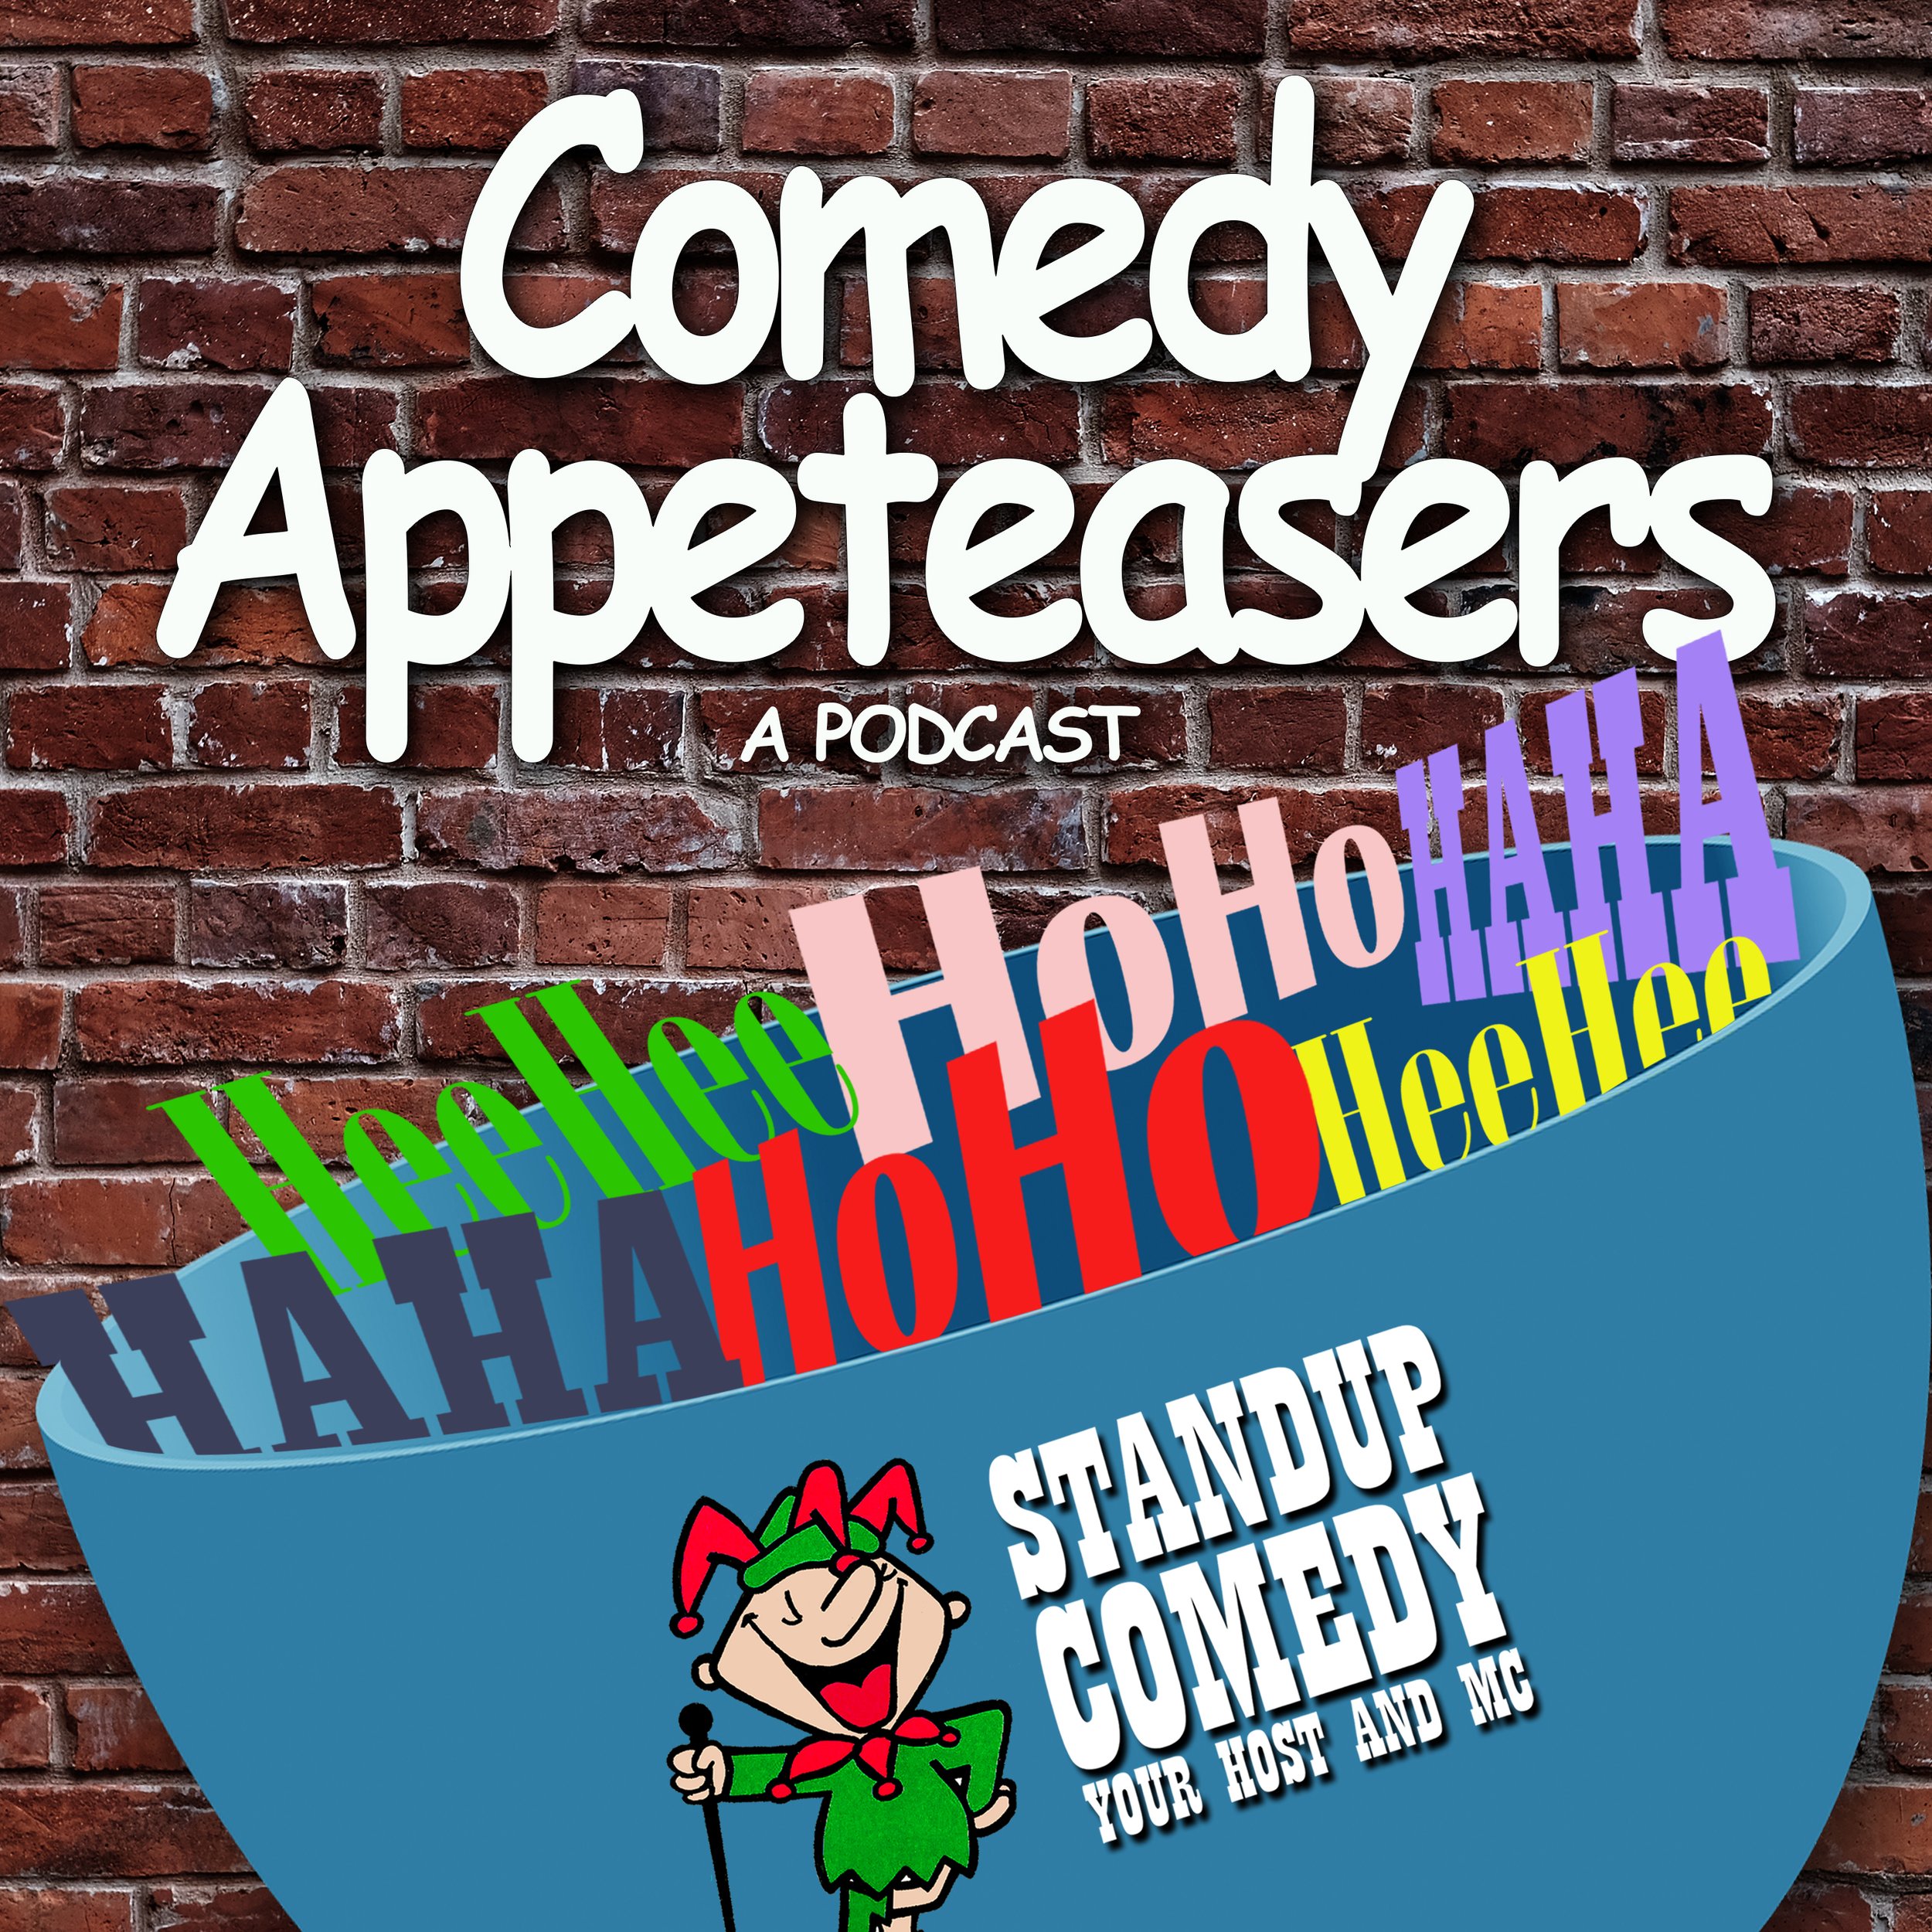 Comedy Appeteasers Podcast with Scott Edwards